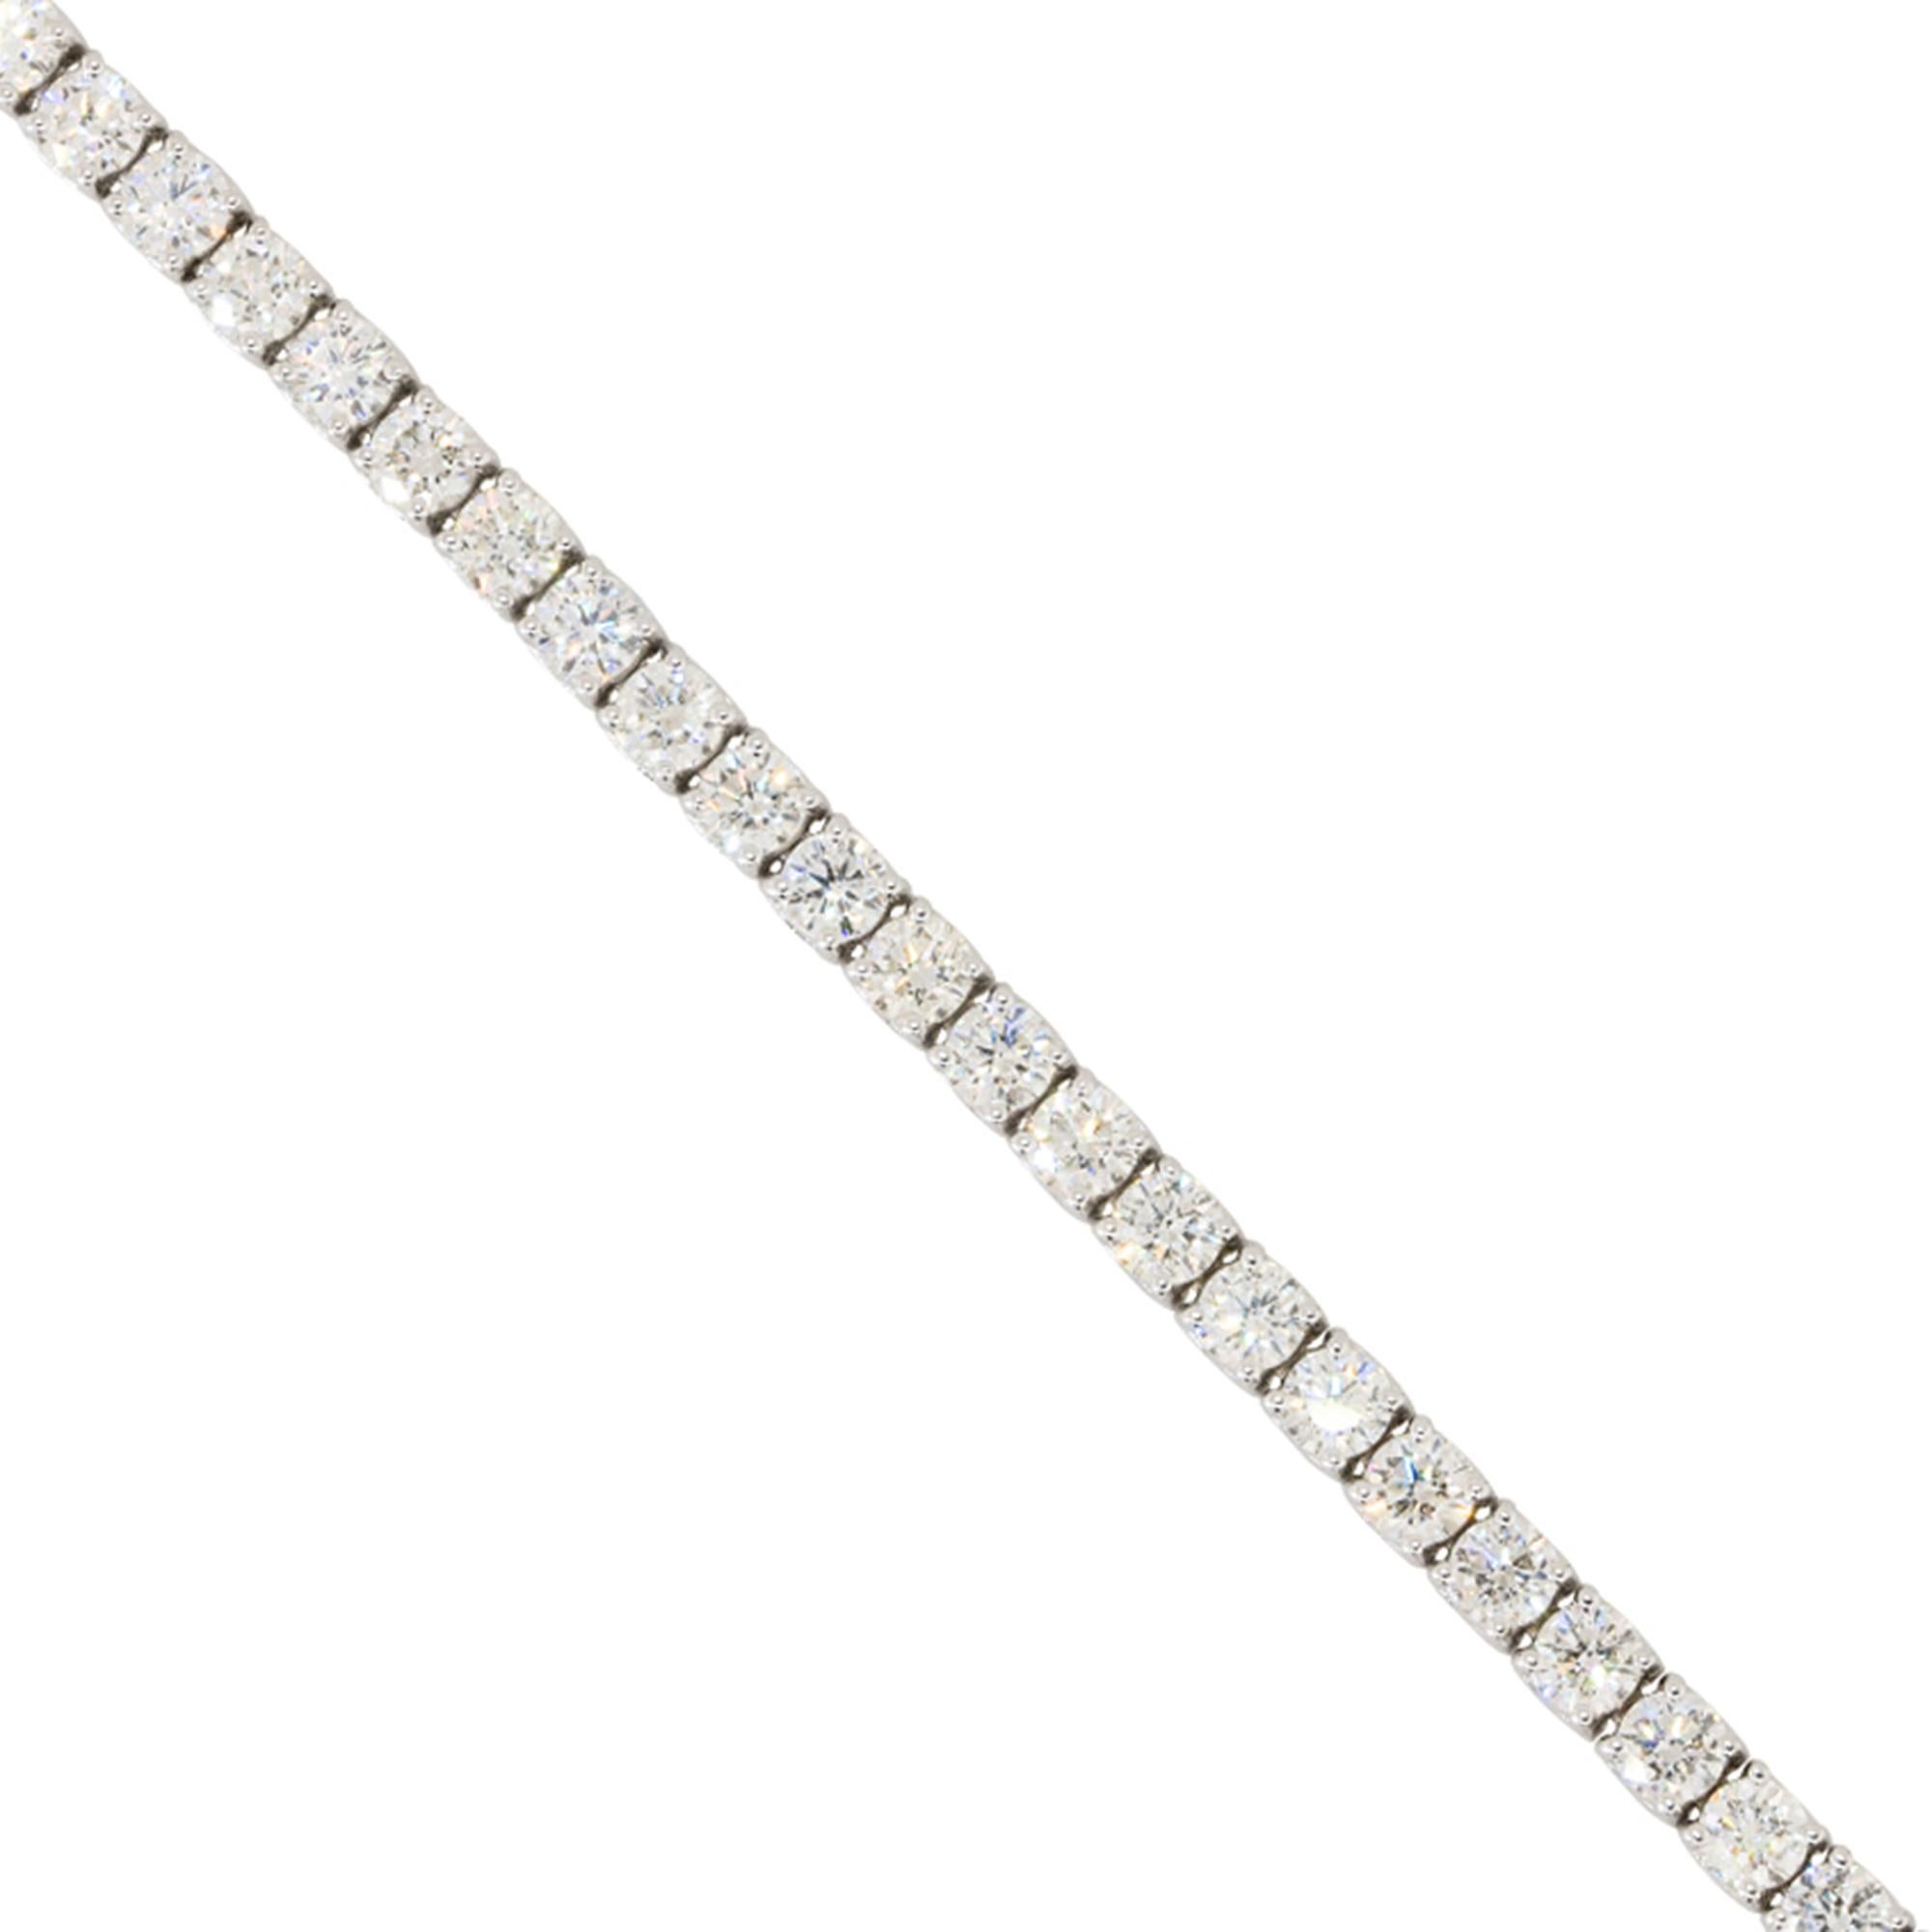 Material: 14k White gold
Diamond Details: Approx. 8.69ctw of round cut Diamonds. Diamonds are G/H in color and VS in clarity. 46 stones in total
Clasps: Tongue in box clasp
Total Weight: 13.2g (8.5dwt)
Length: 7